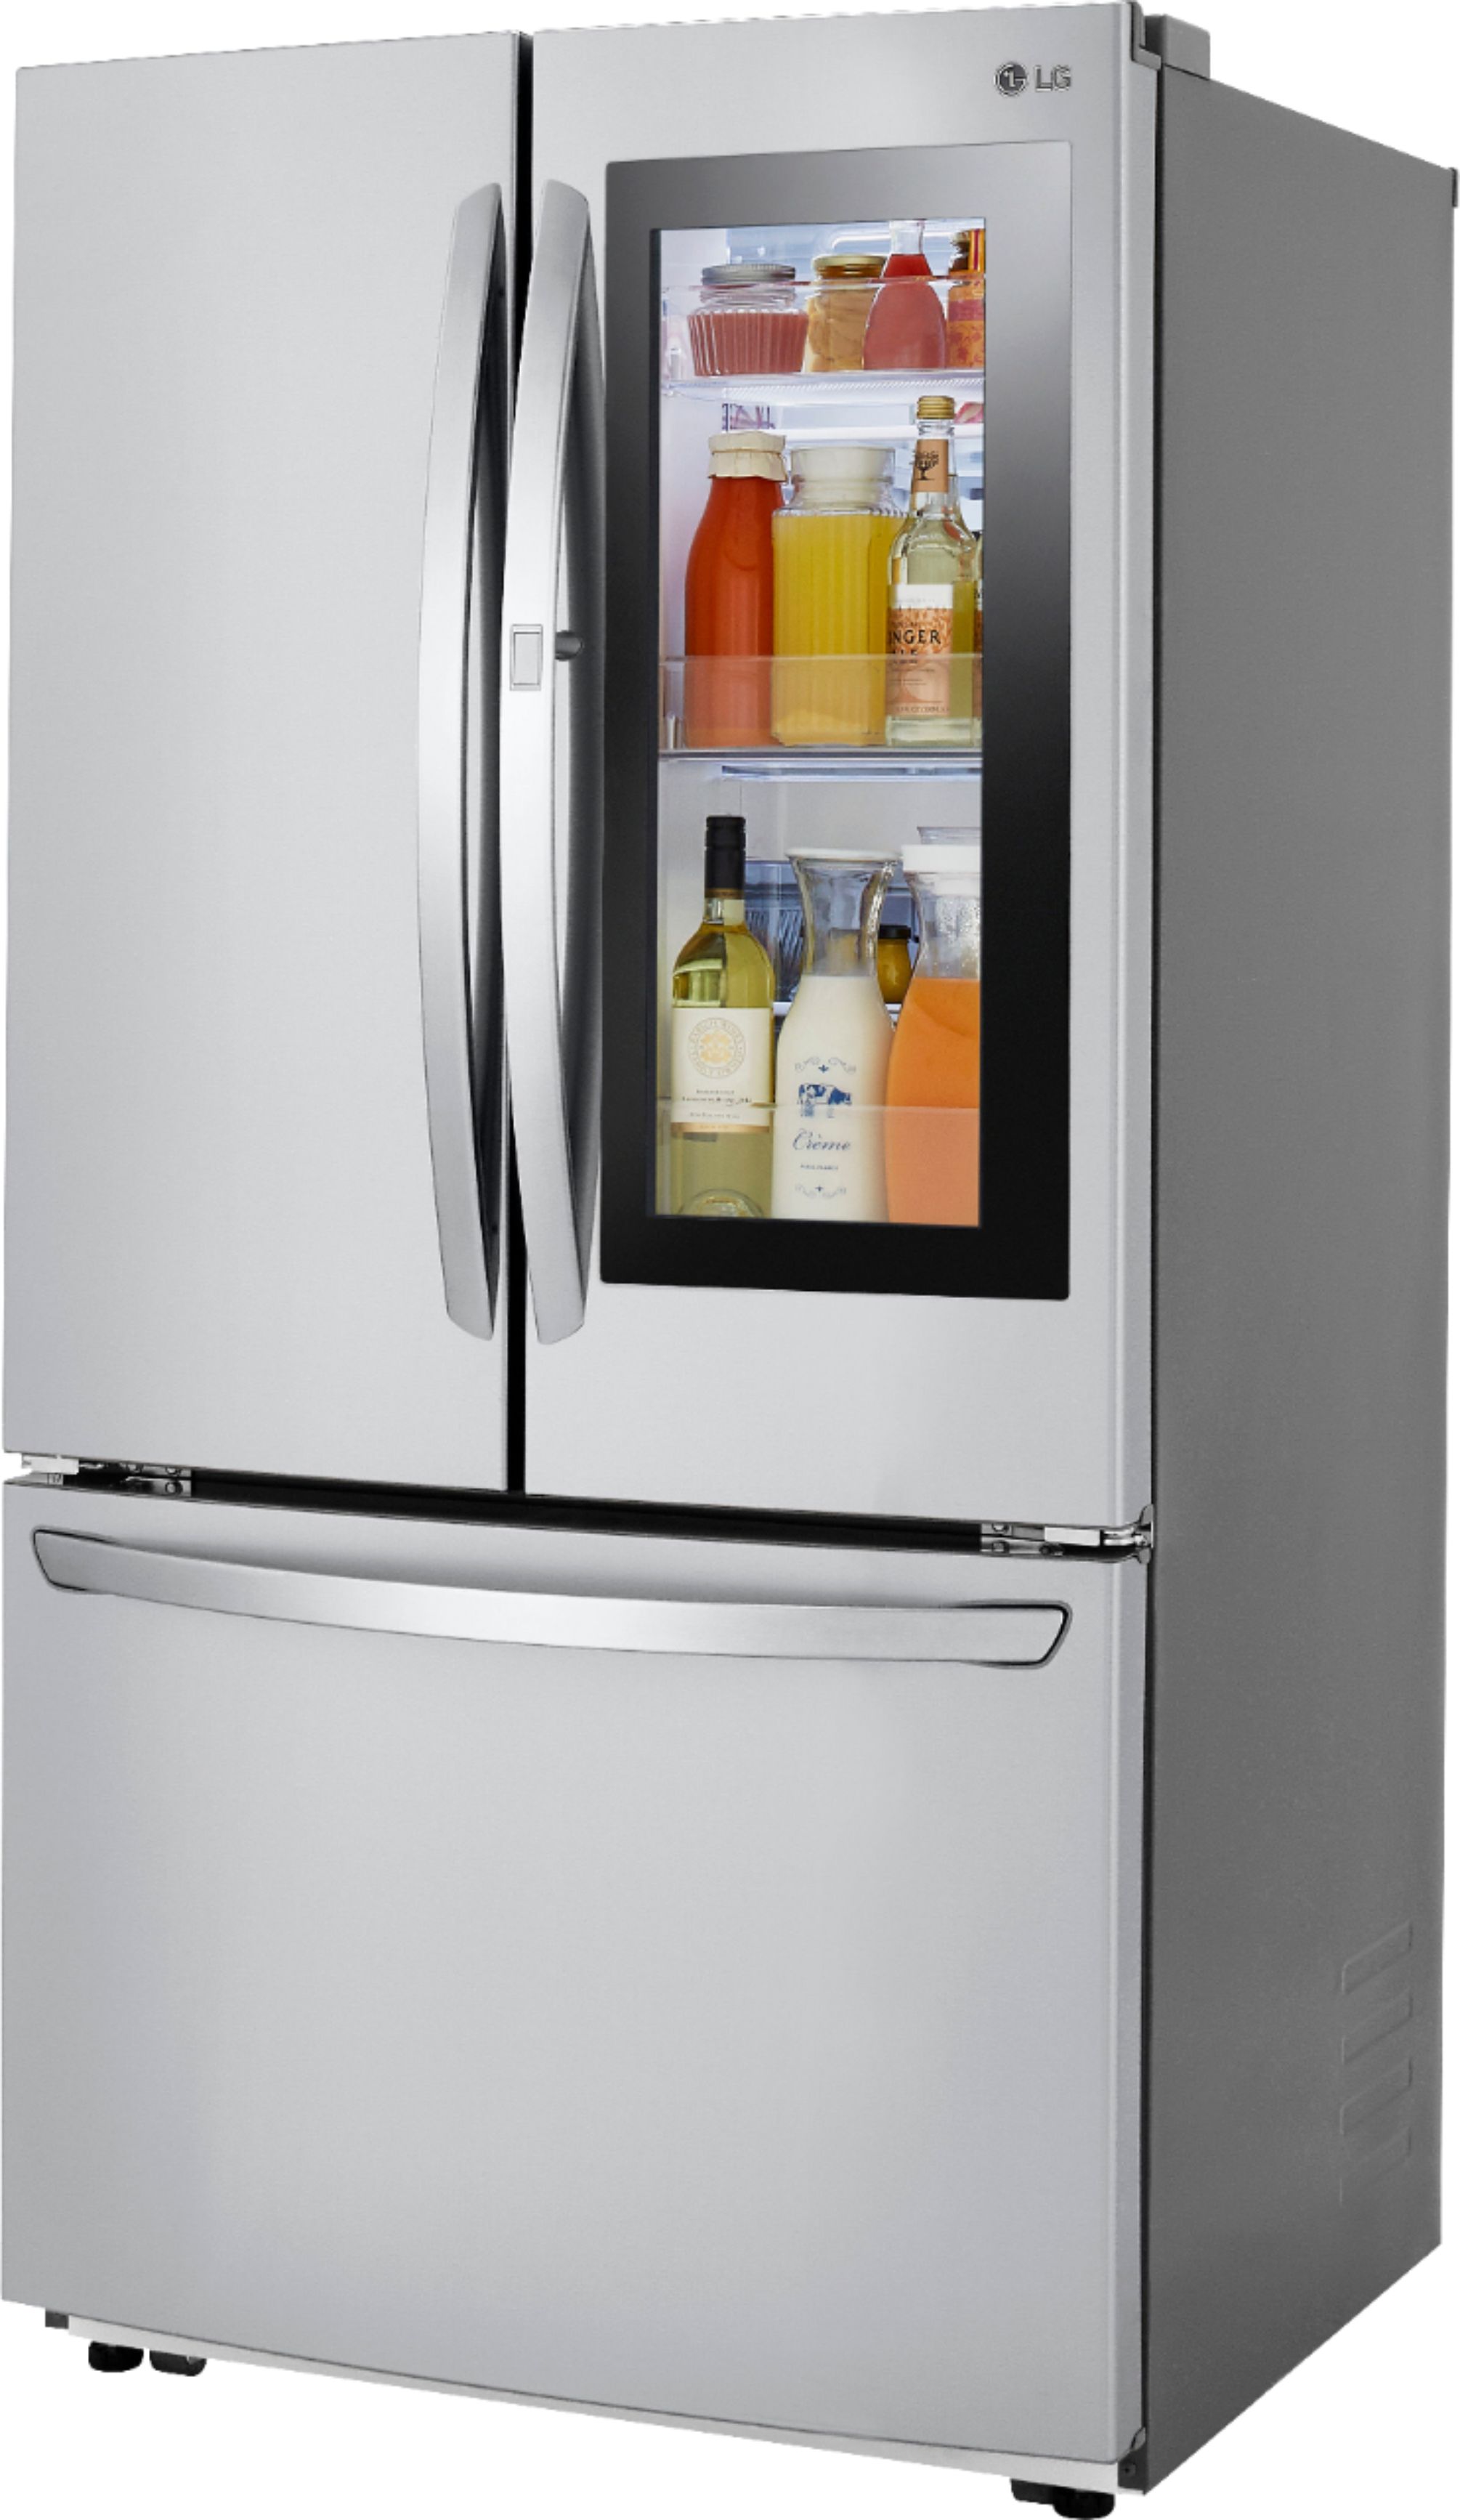 Questions and Answers: LG 22.6 Cu. Ft. French InstaView Door-in-Door ...